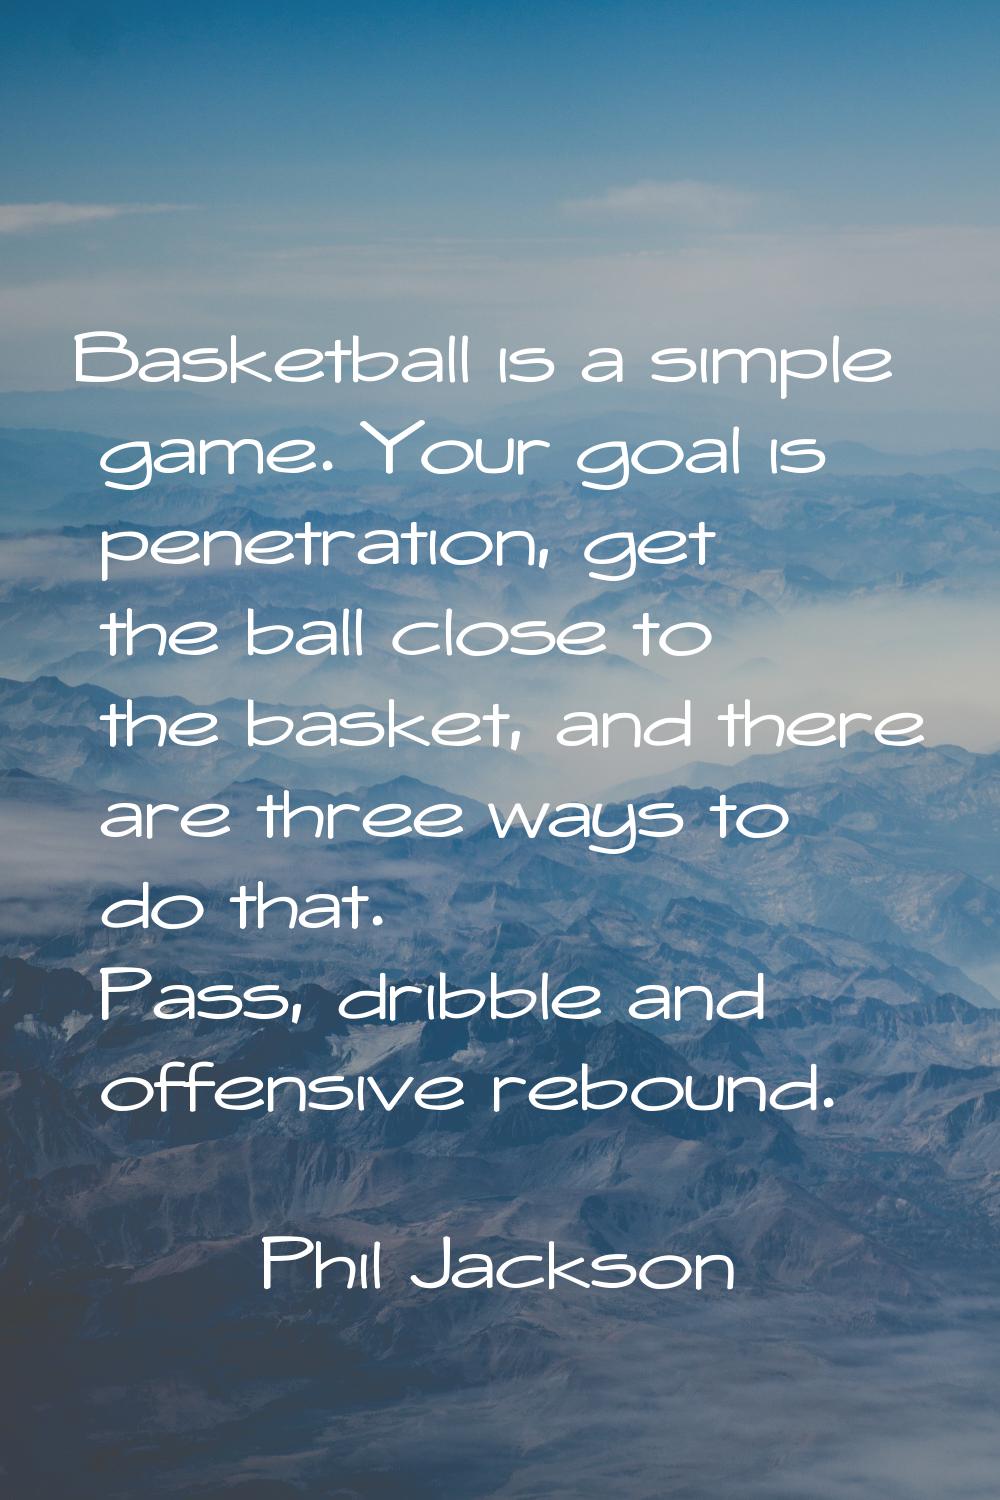 Basketball is a simple game. Your goal is penetration, get the ball close to the basket, and there 